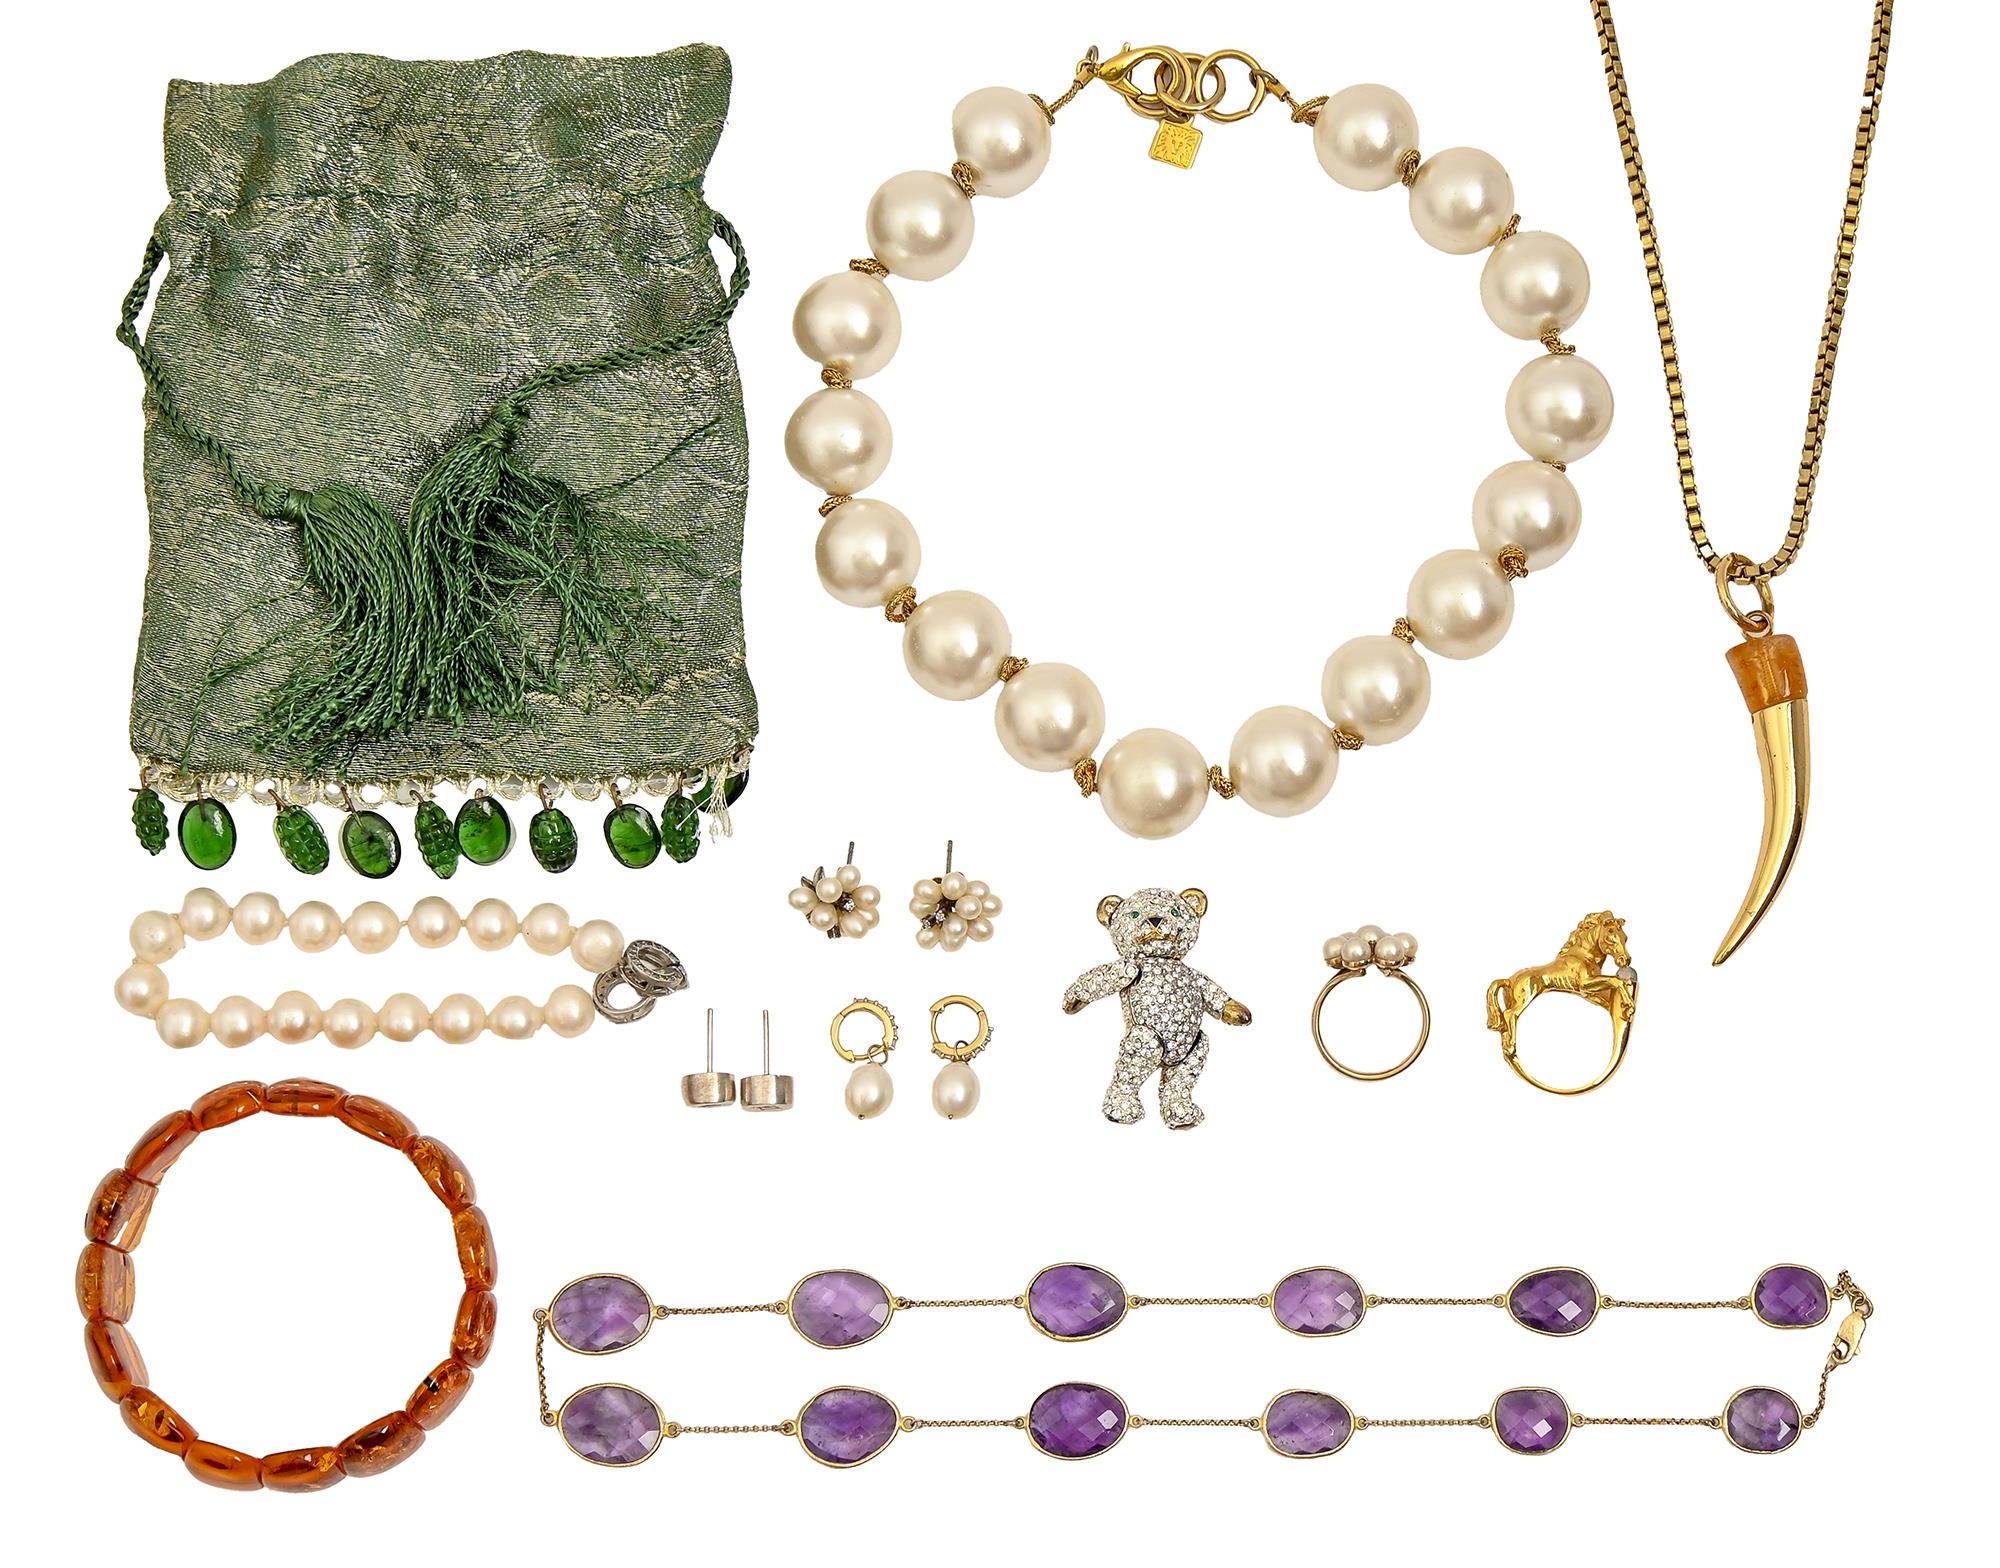 A bangle of amber beads and miscellaneous costume jewellery, to include an amethyst and silver